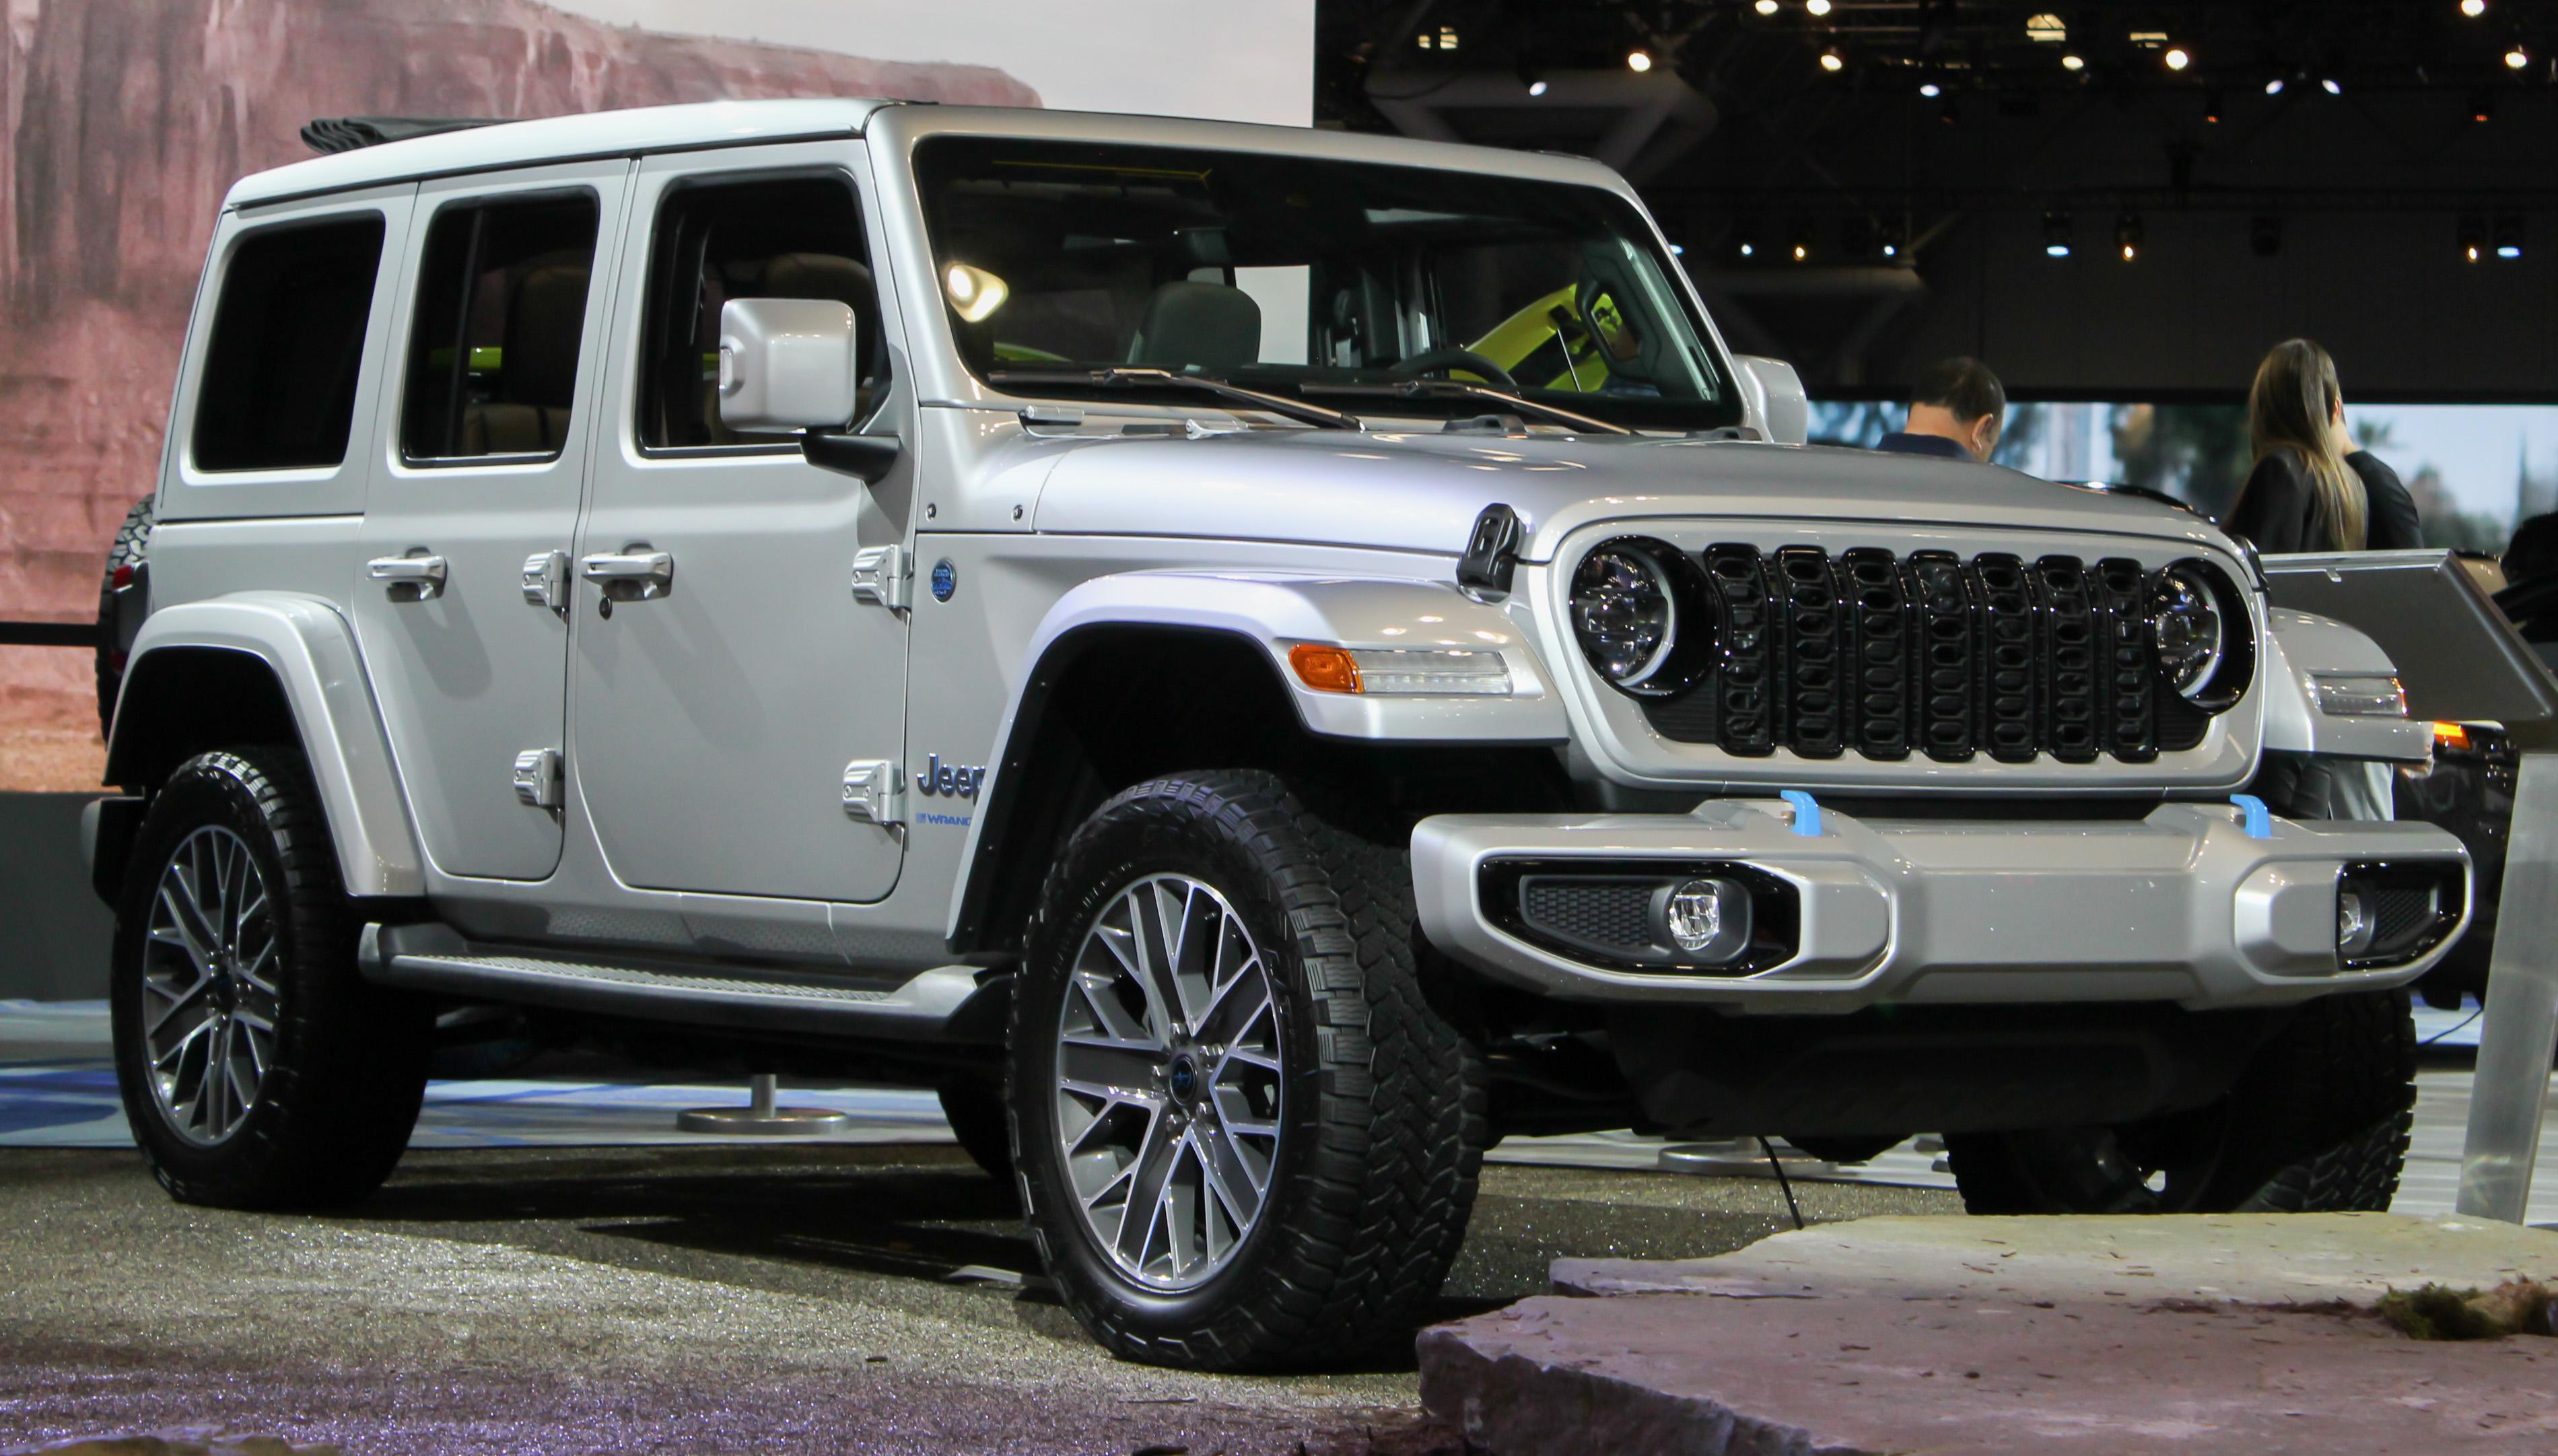 Types of material used for Jeep wraps